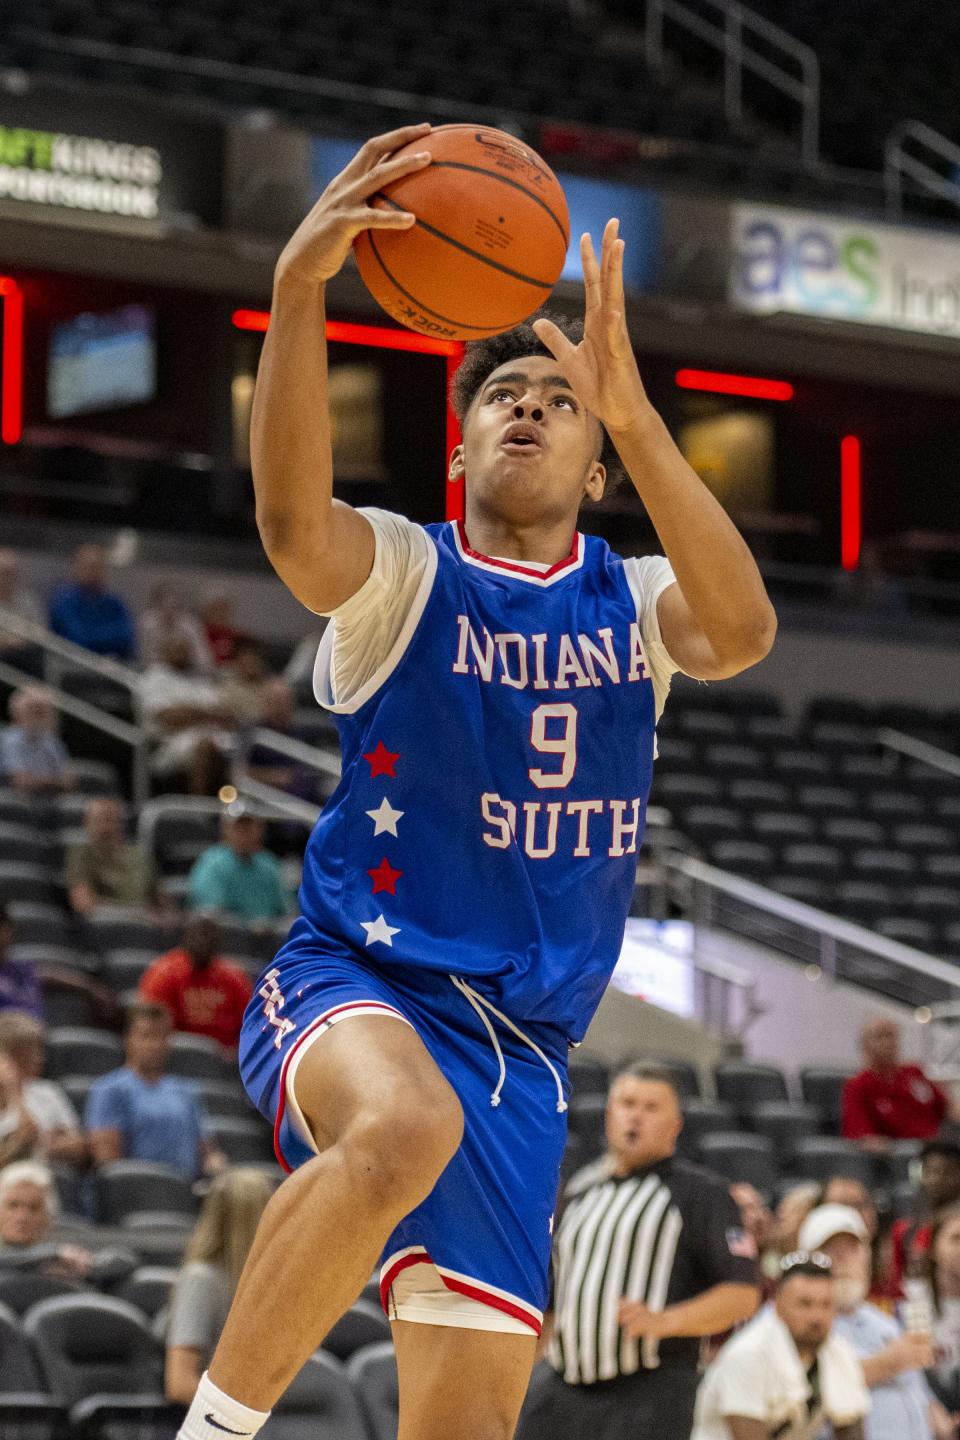 South Future All-Star Brennan Miller (9), a freshman from Lawrence North High School, shoots during the second half of an boysâ€™ Indiana High School Future All-Stars basketball game, Saturday, June 10, 2023, at Gainbridge Fieldhouse, in Indianapolis.